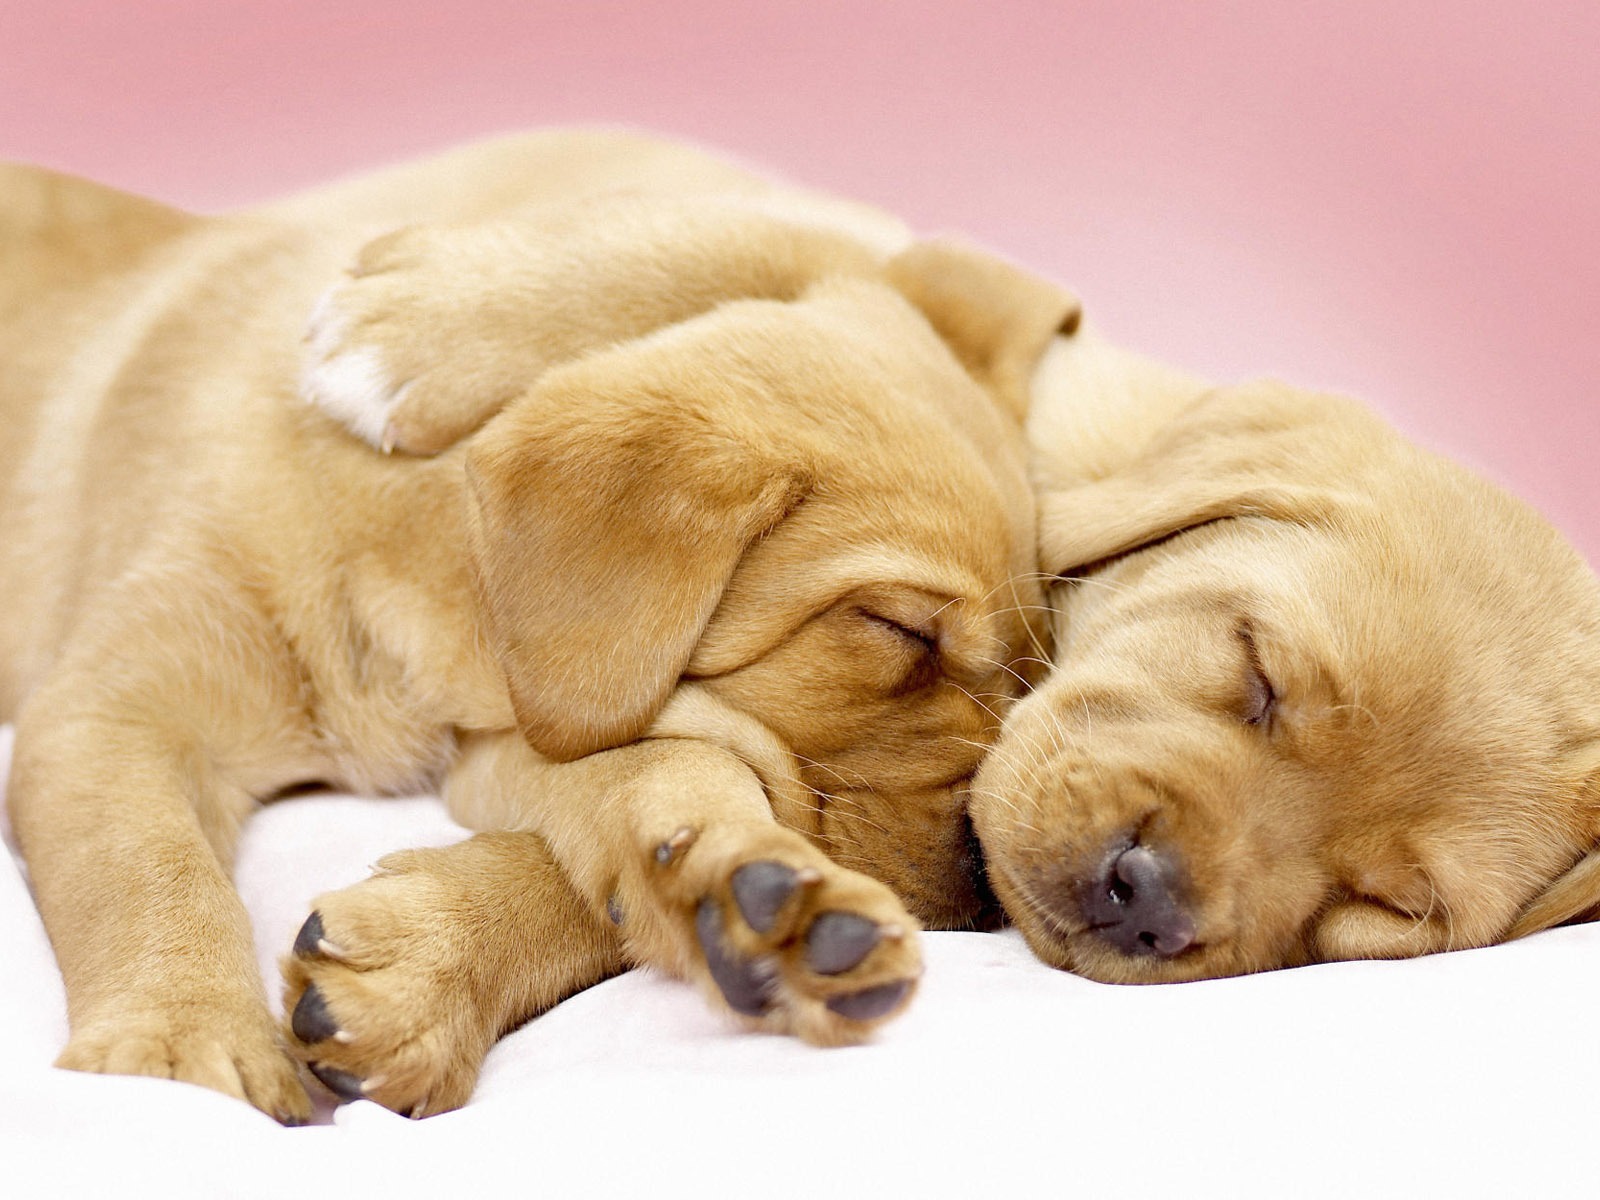 Puppy Photo HD wallpapers (7) #1 - 1600x1200